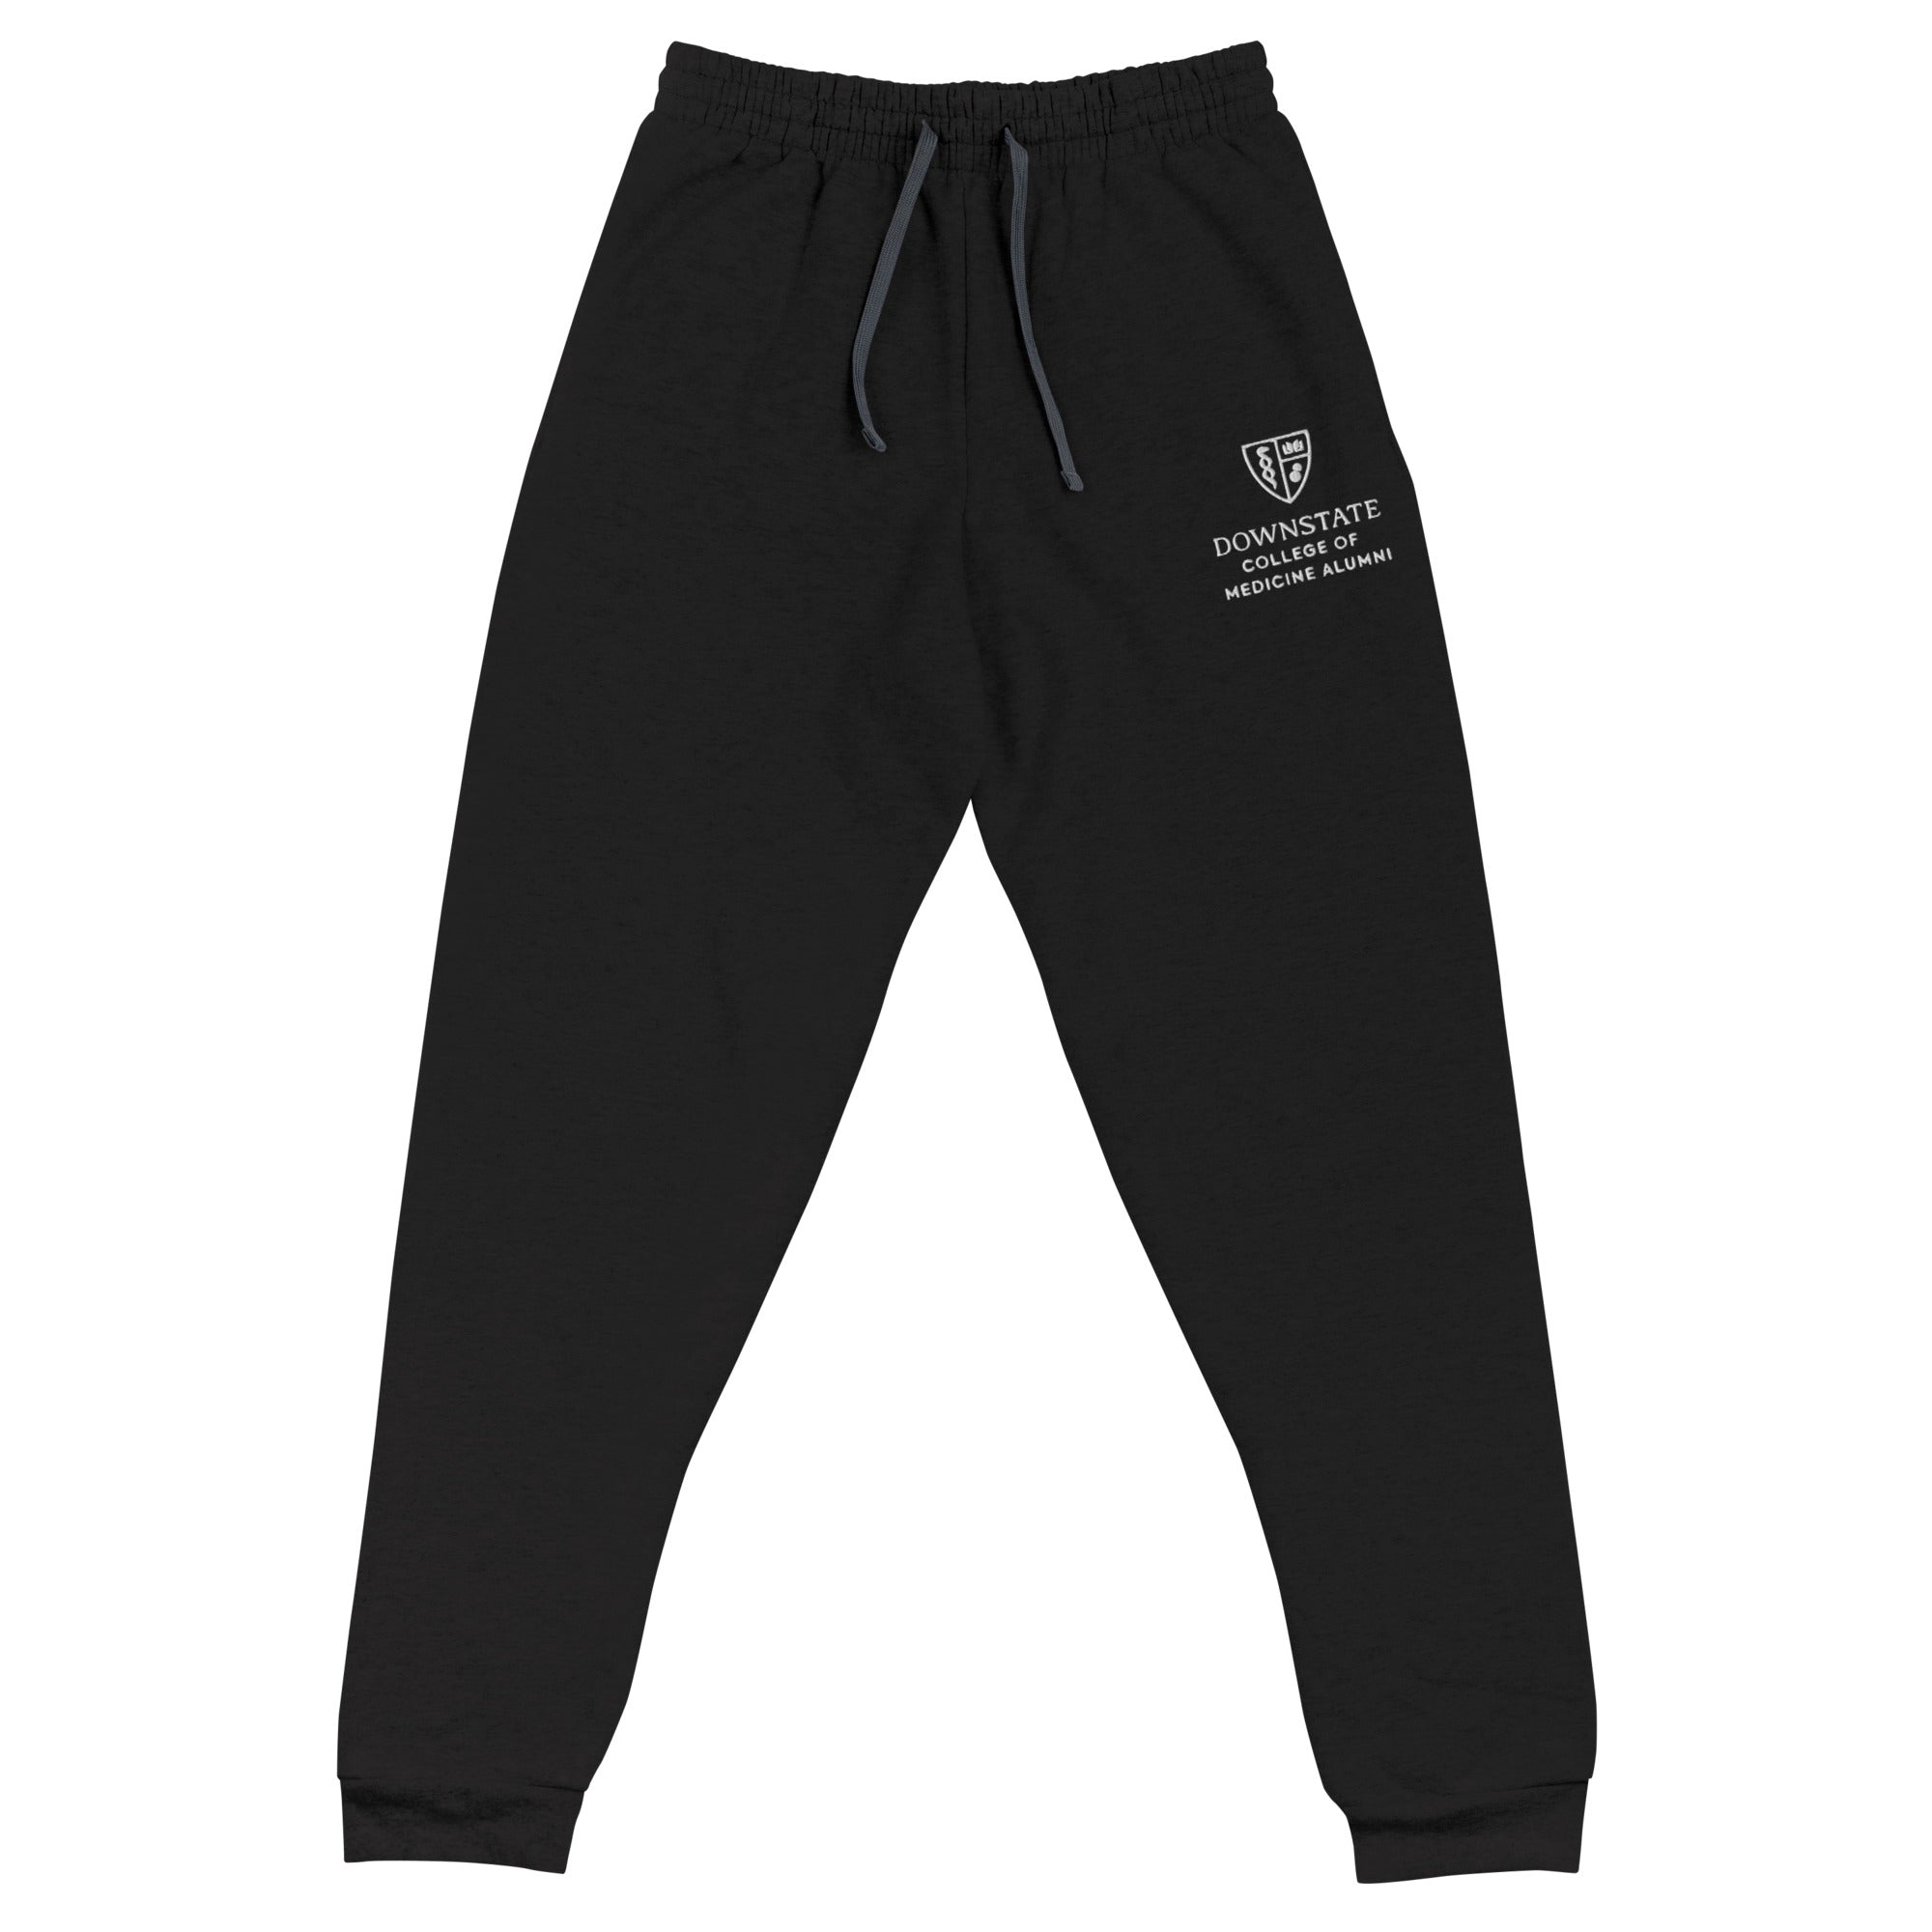 AACMSD Unisex Joggers